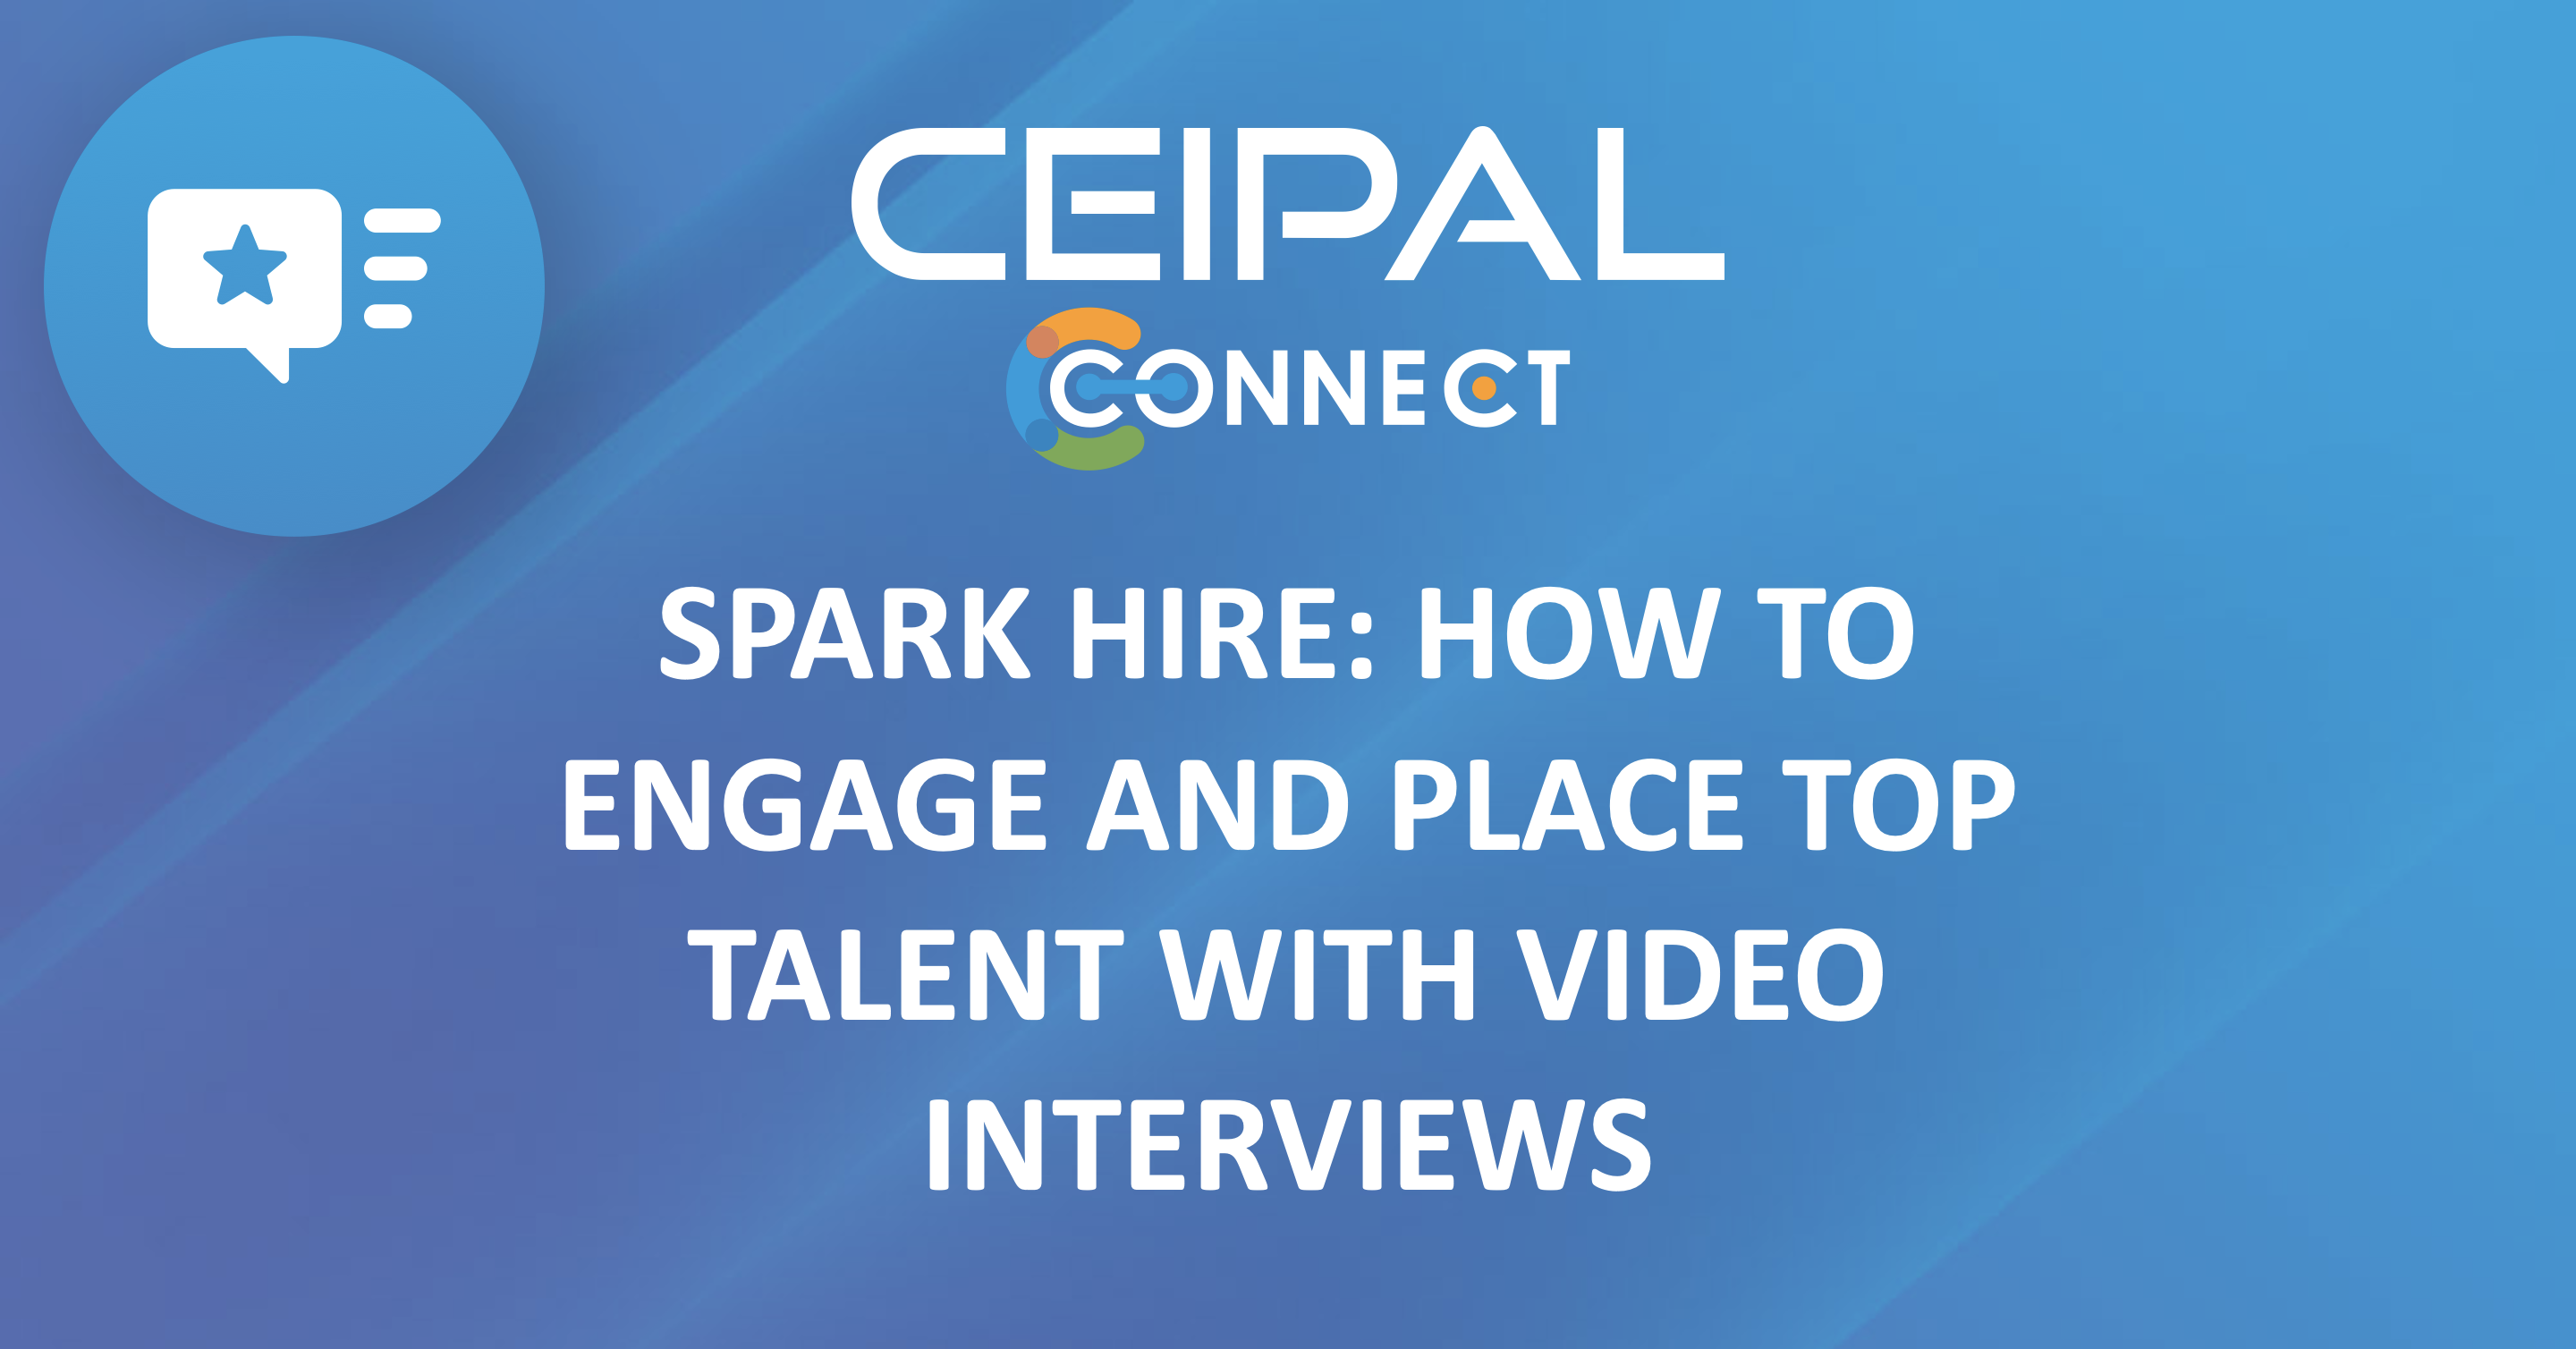 Spark Hire: How to Engage and Place Top Talent with Video Interviews